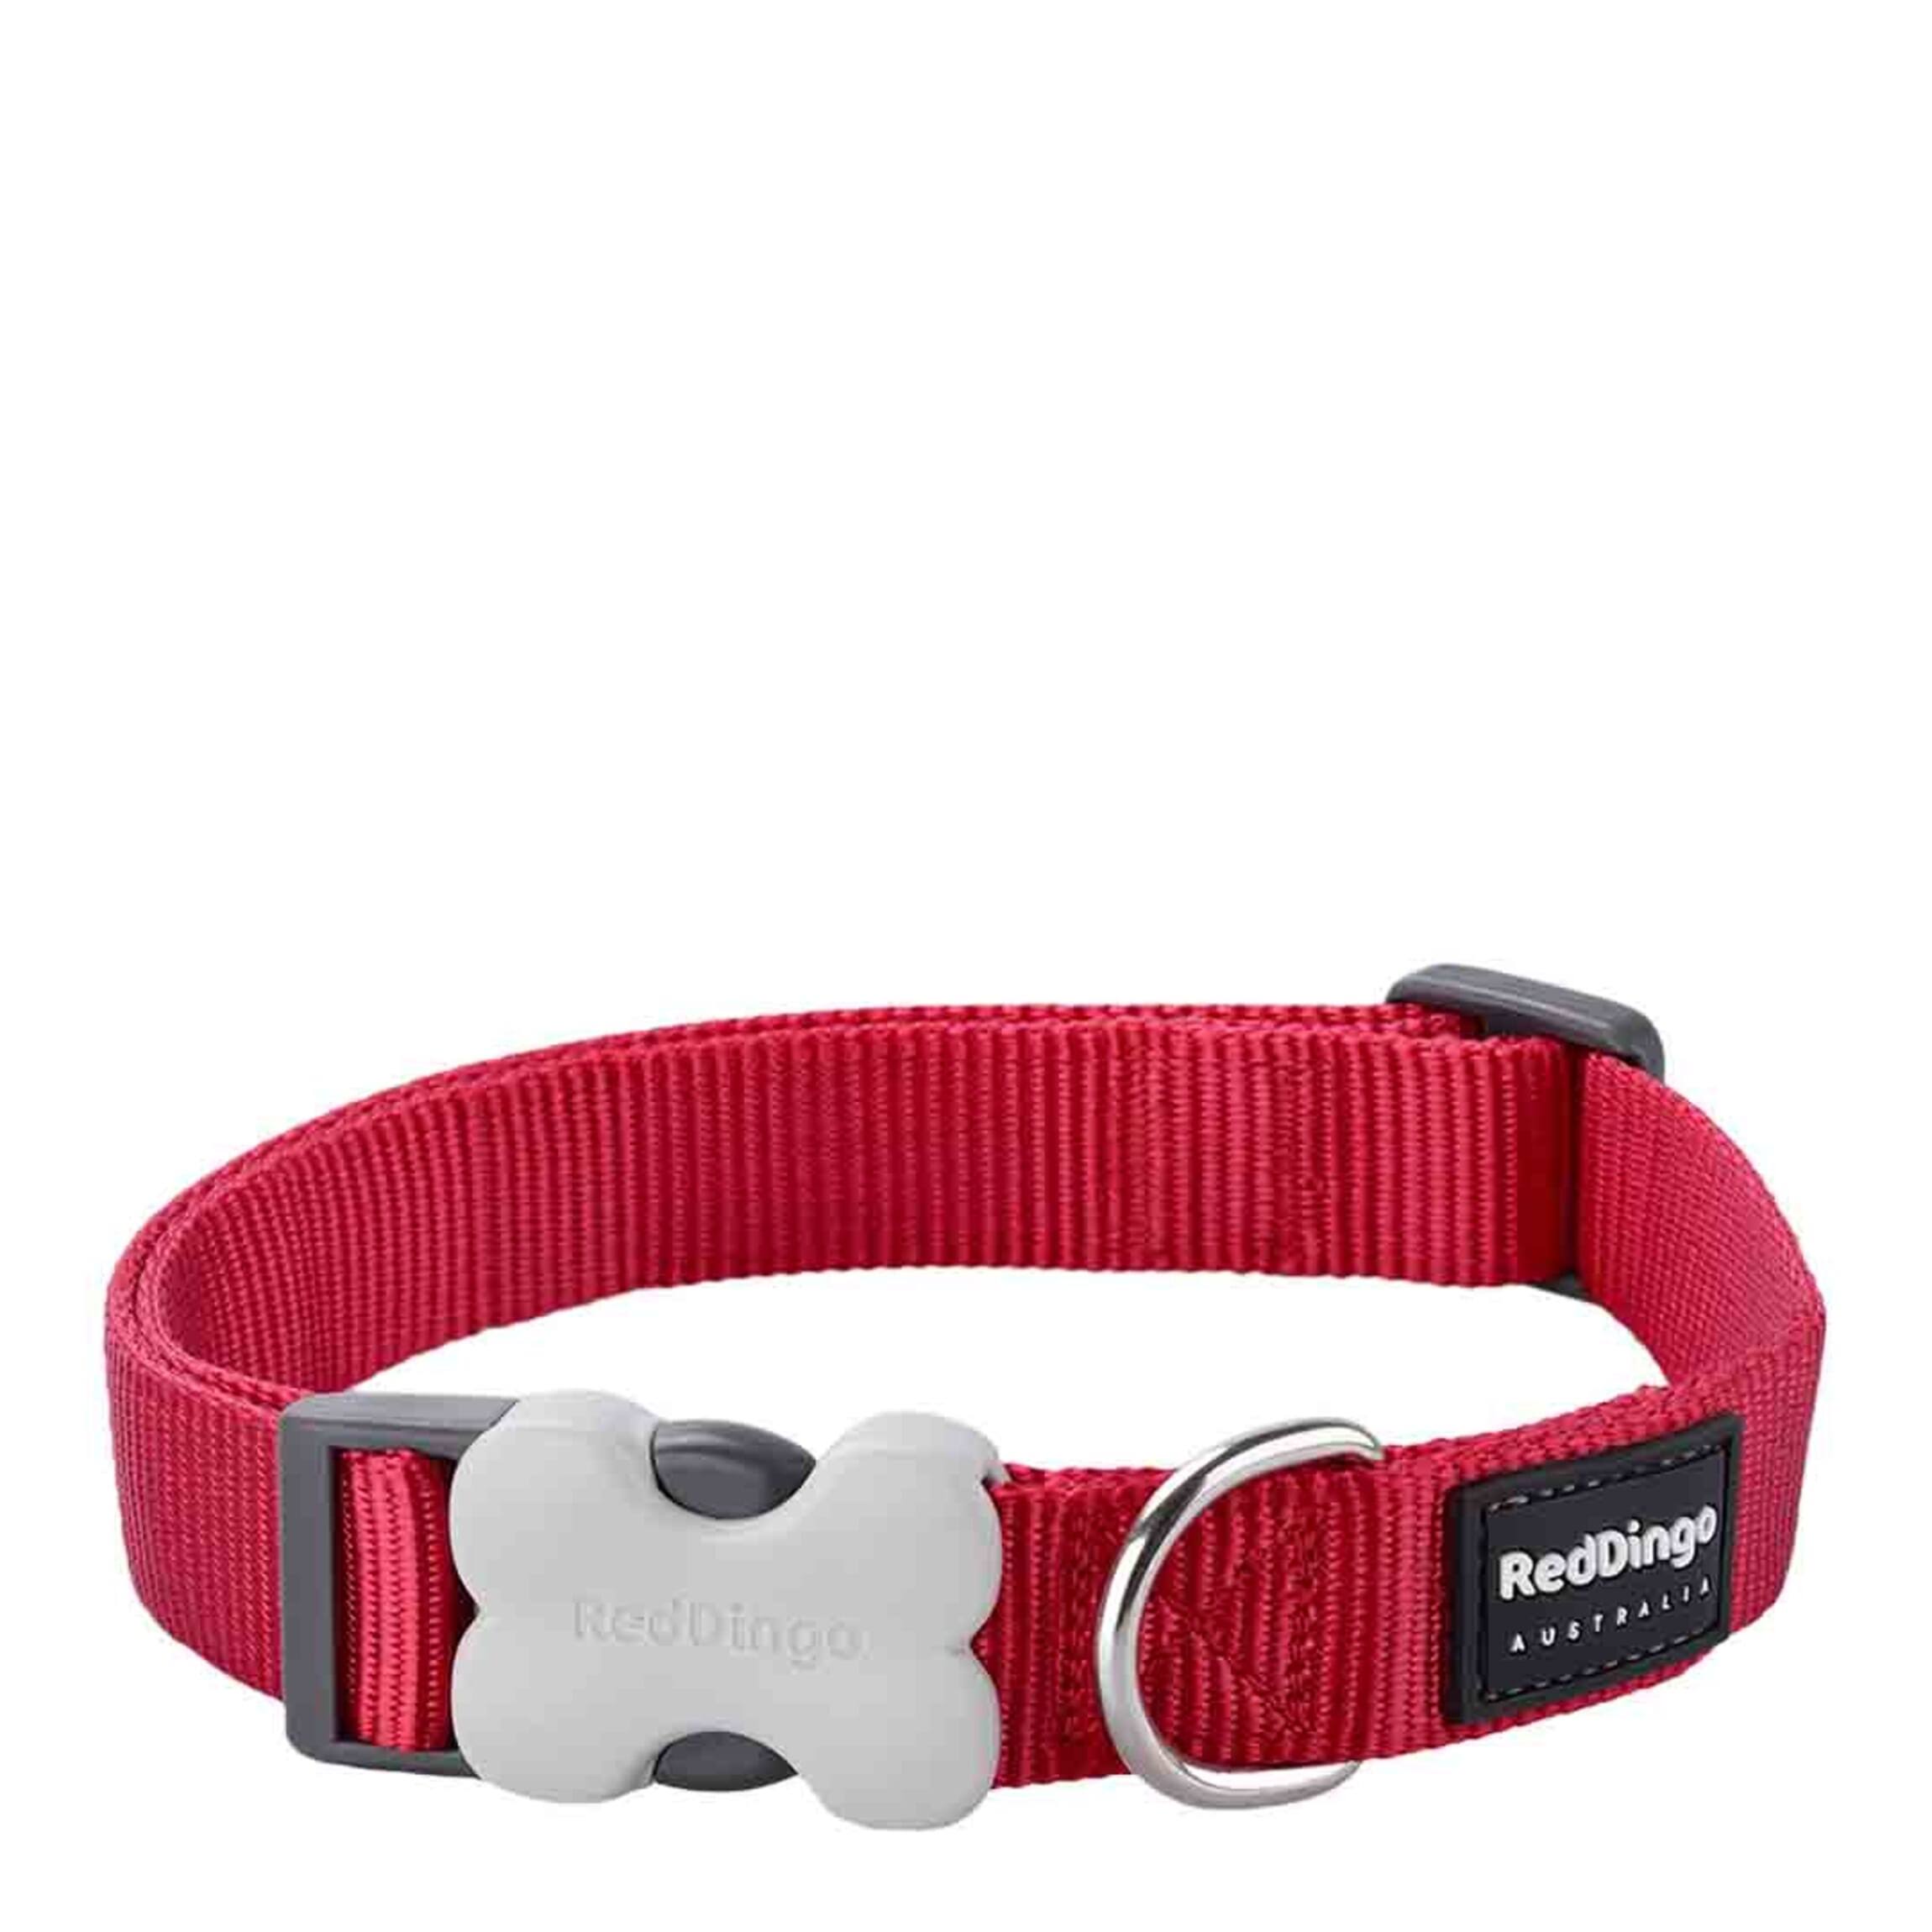 Red Dingo Dog Collar - Classic Red, Large